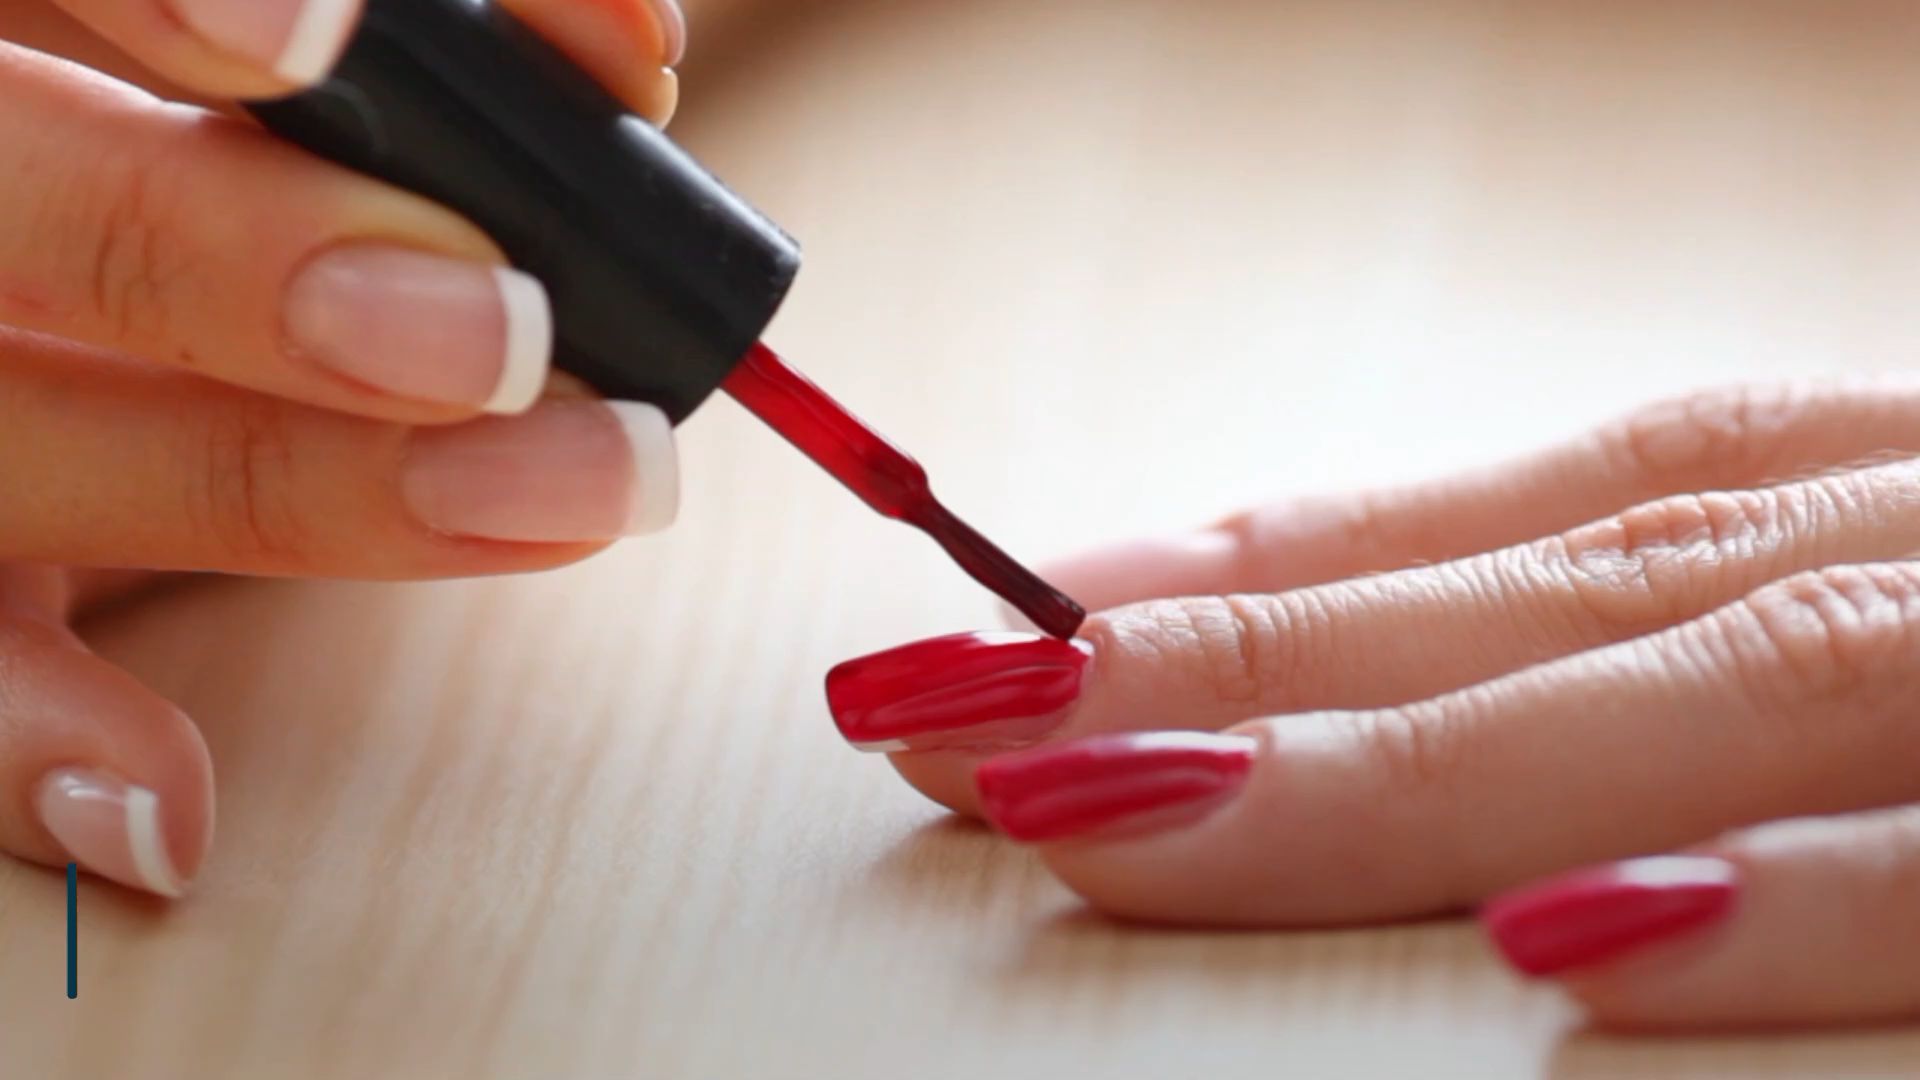 How harmful is Shellac for nails?